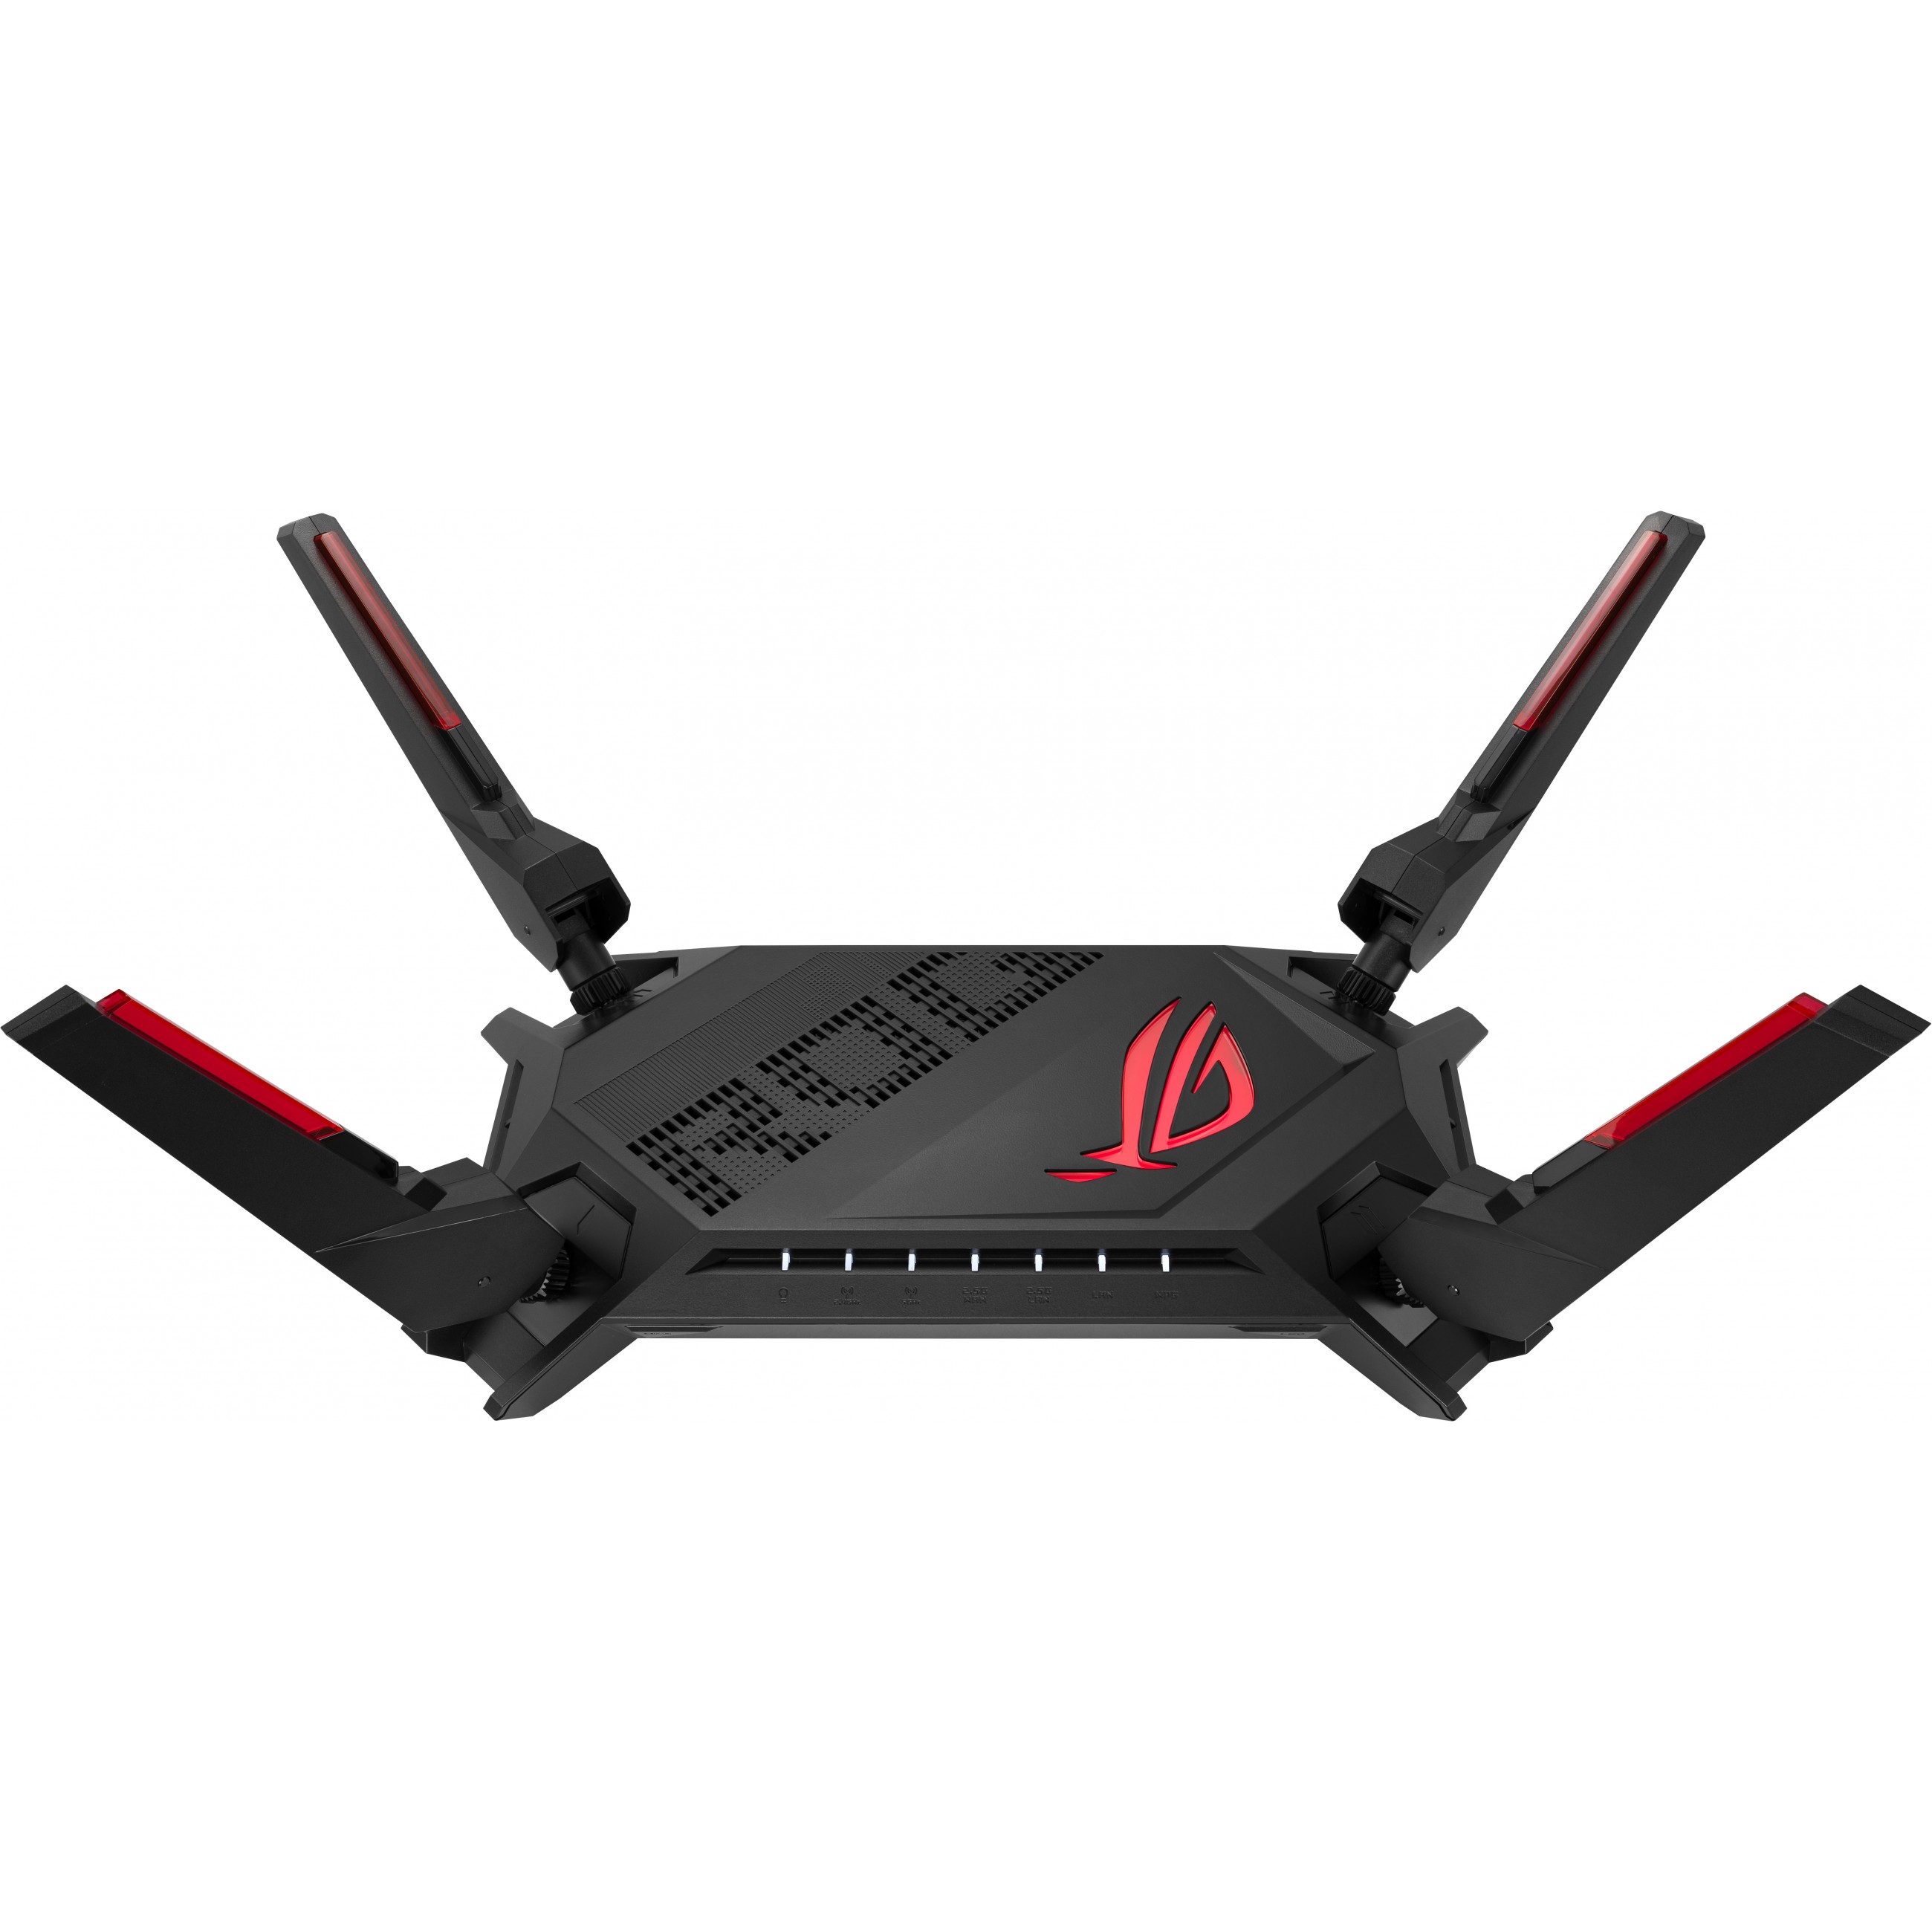 ASUS GT-AX6000 AiMesh wireless router